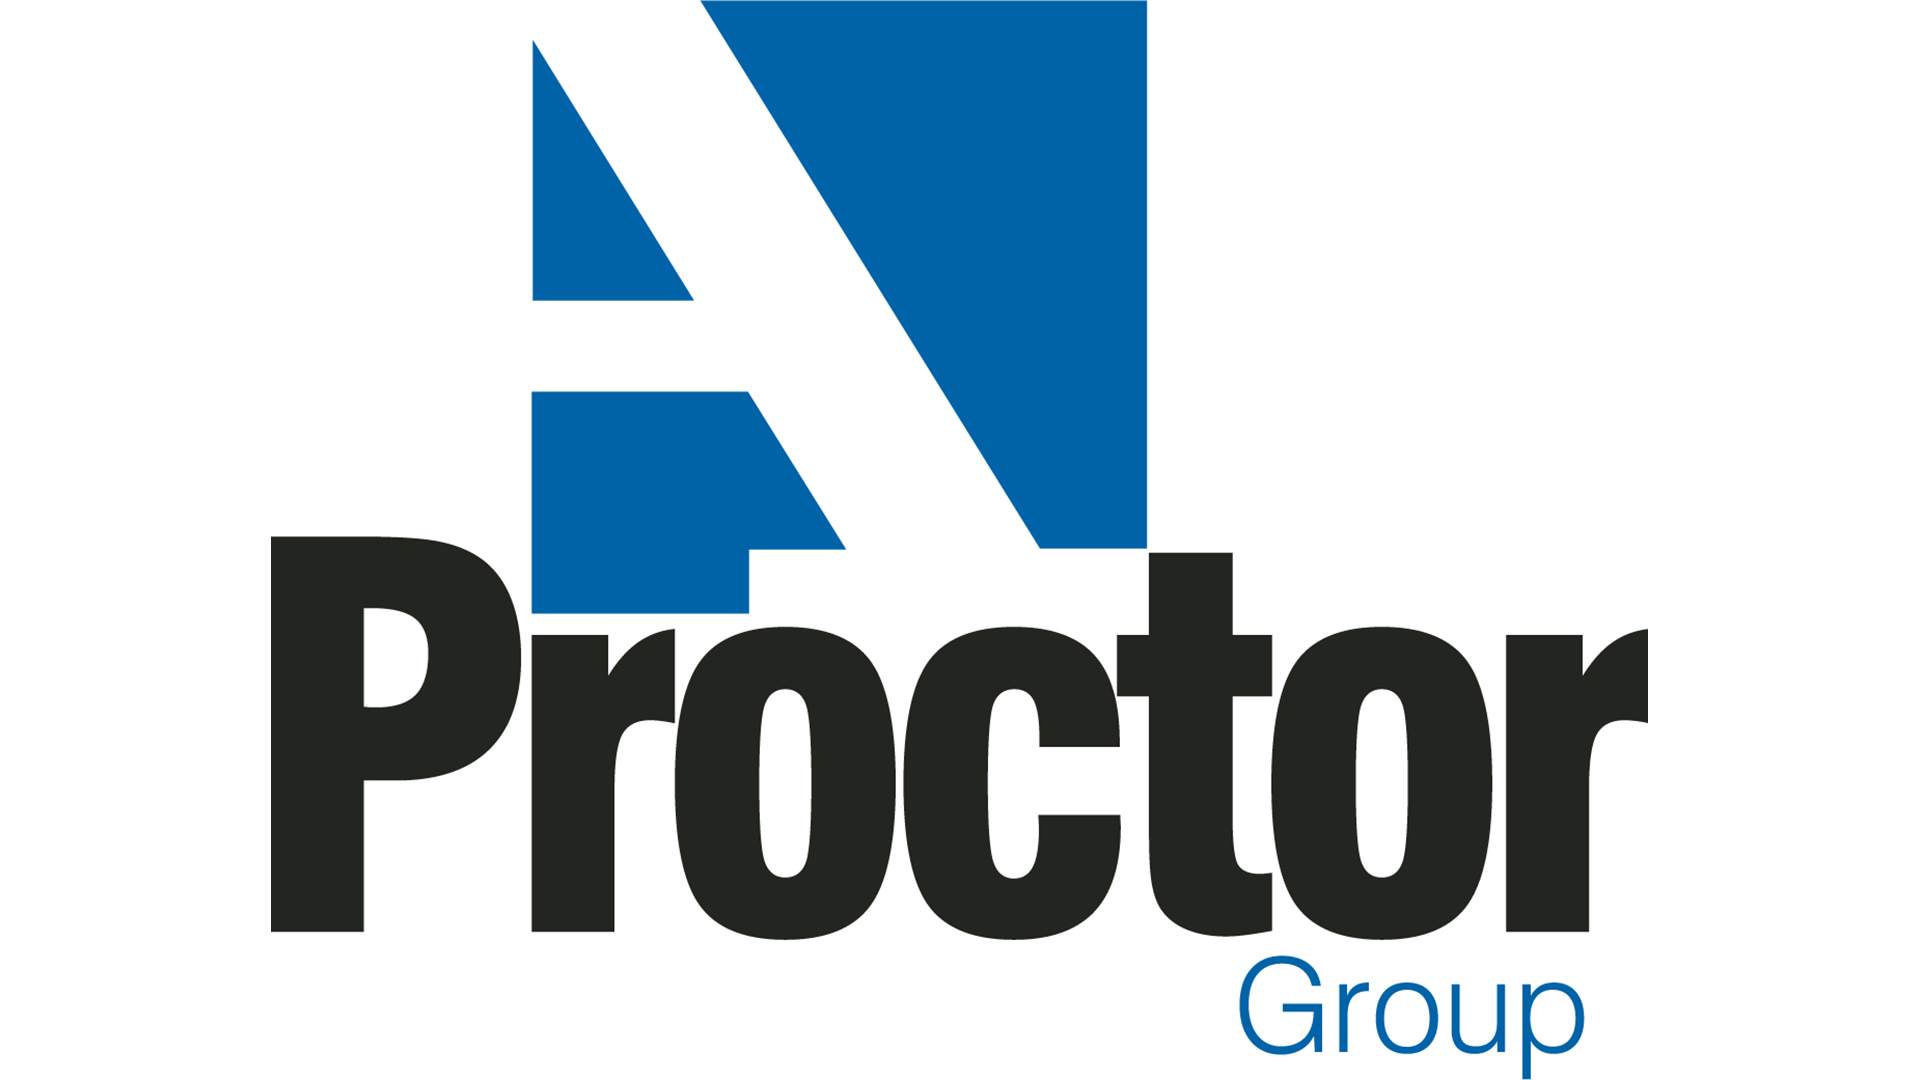 A Proctor Group  